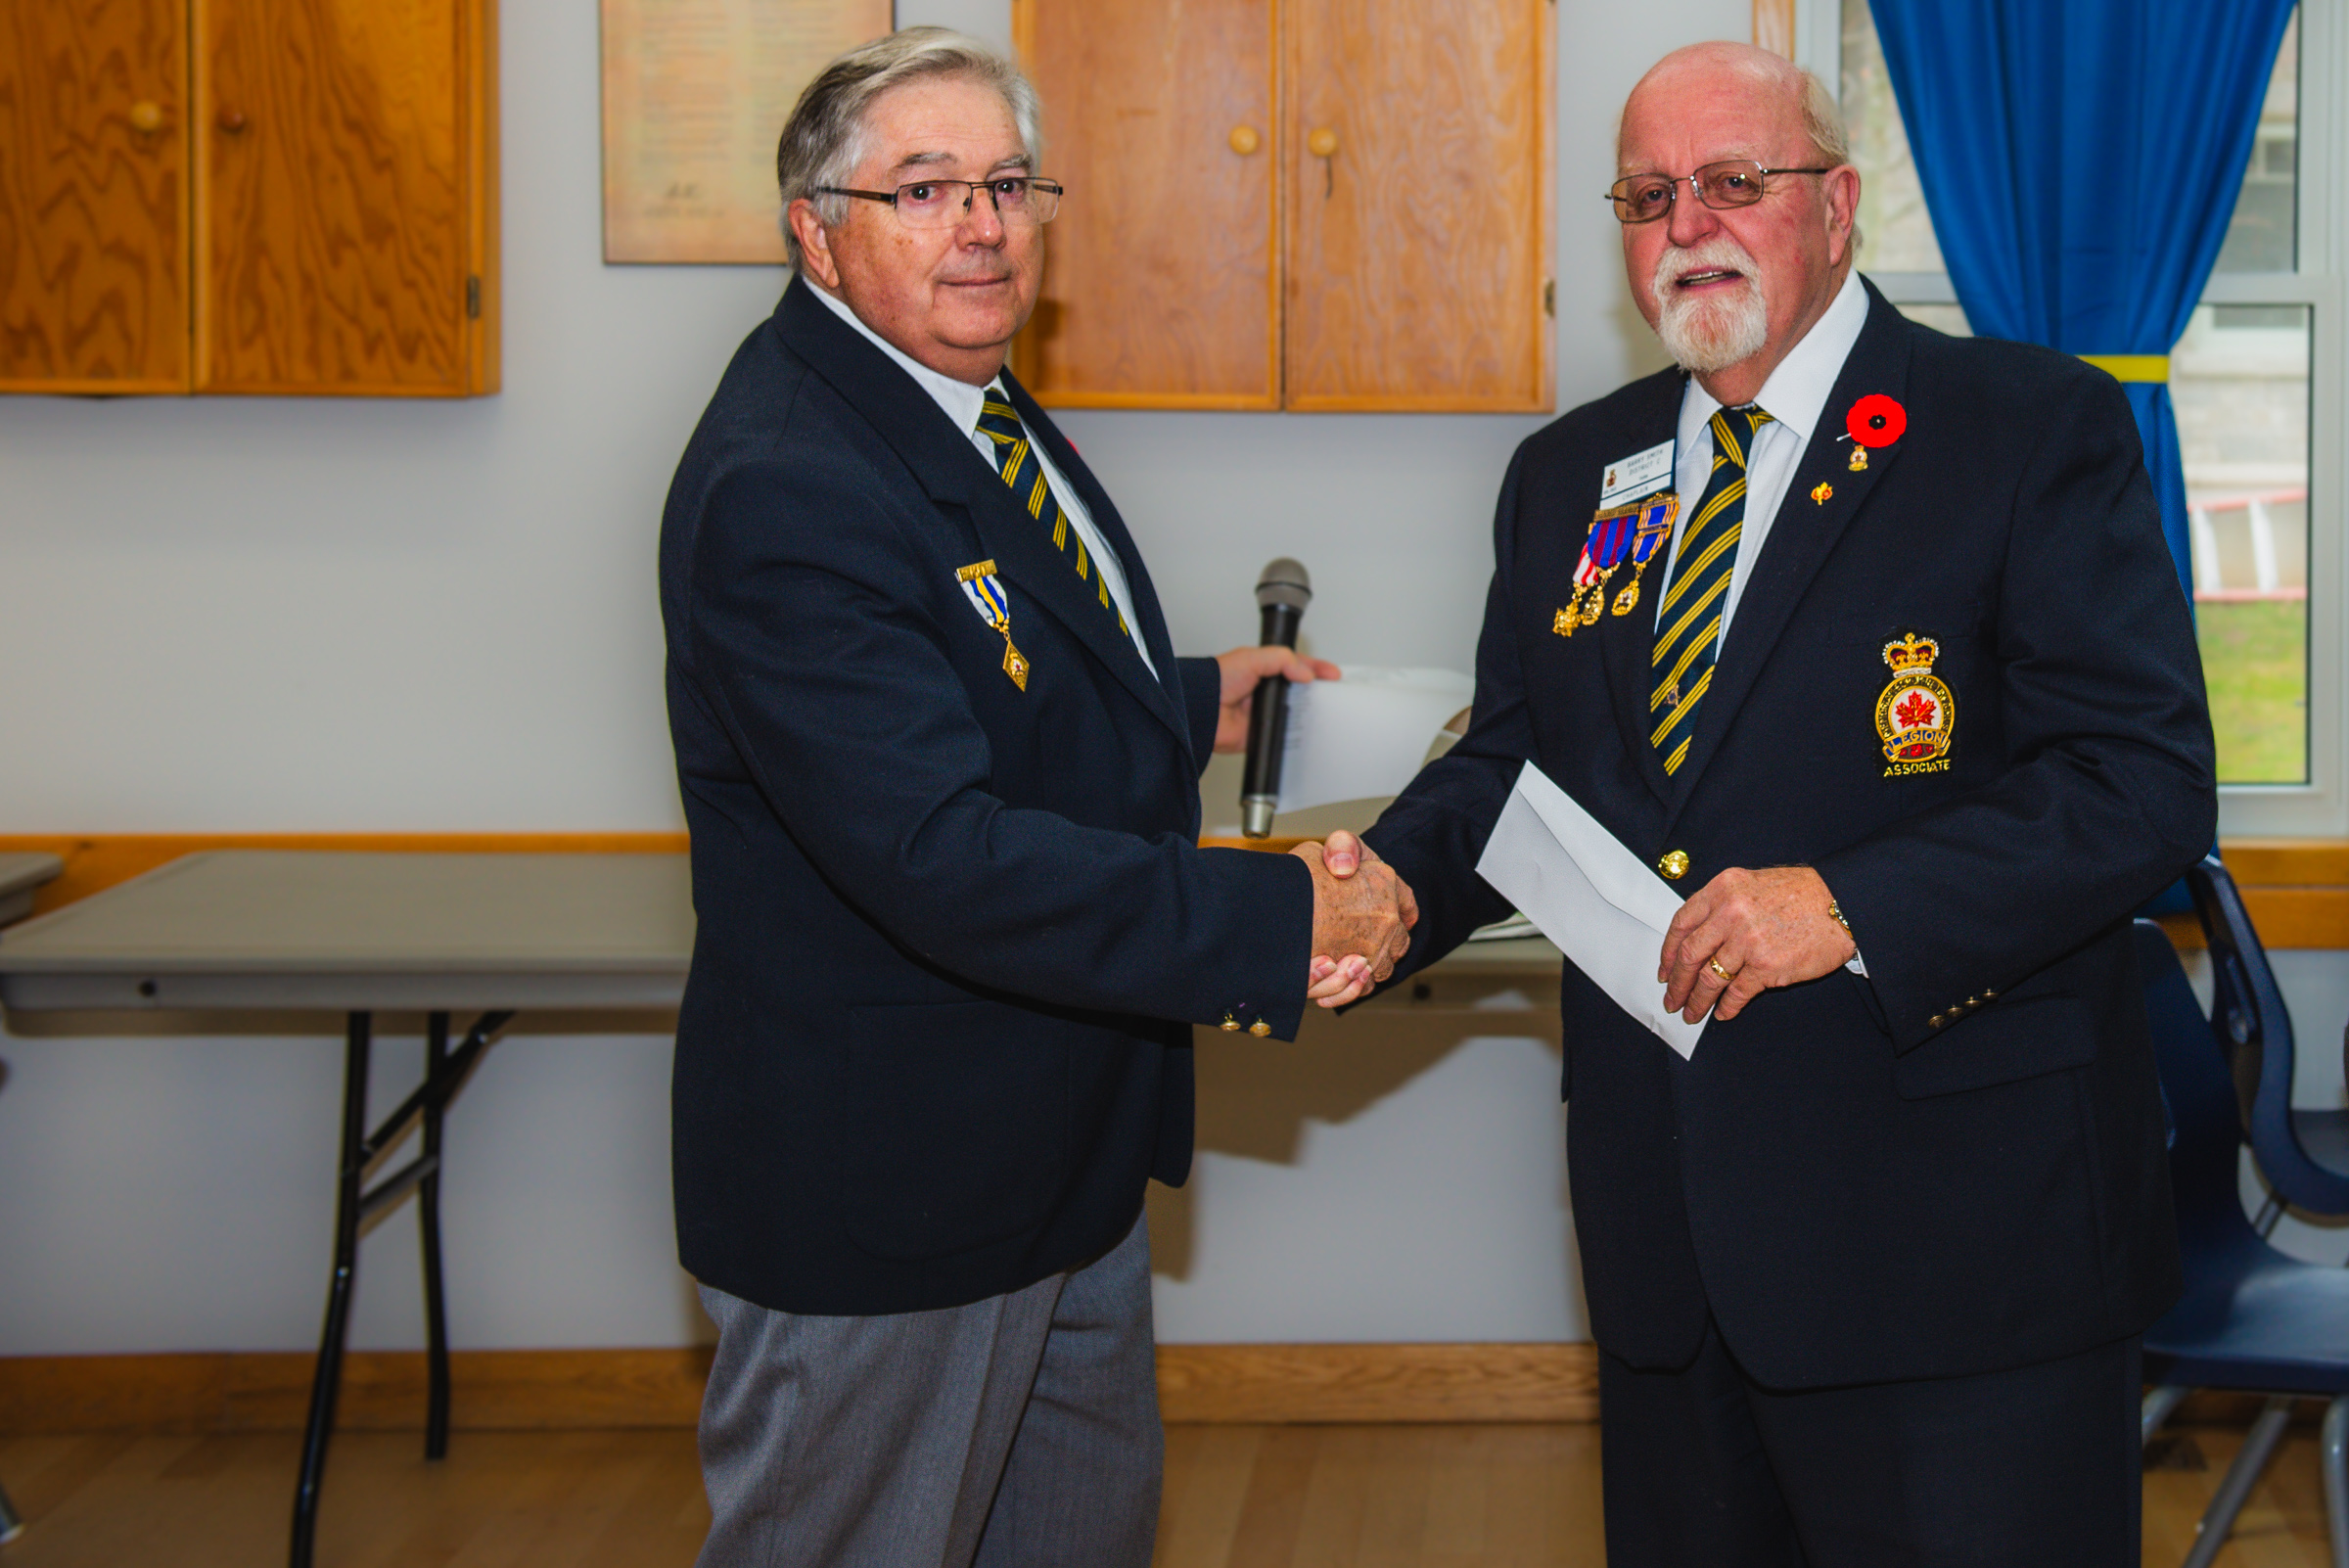 Comrade Barry Smith is receiving his 40 year pin on 11 Nov 23